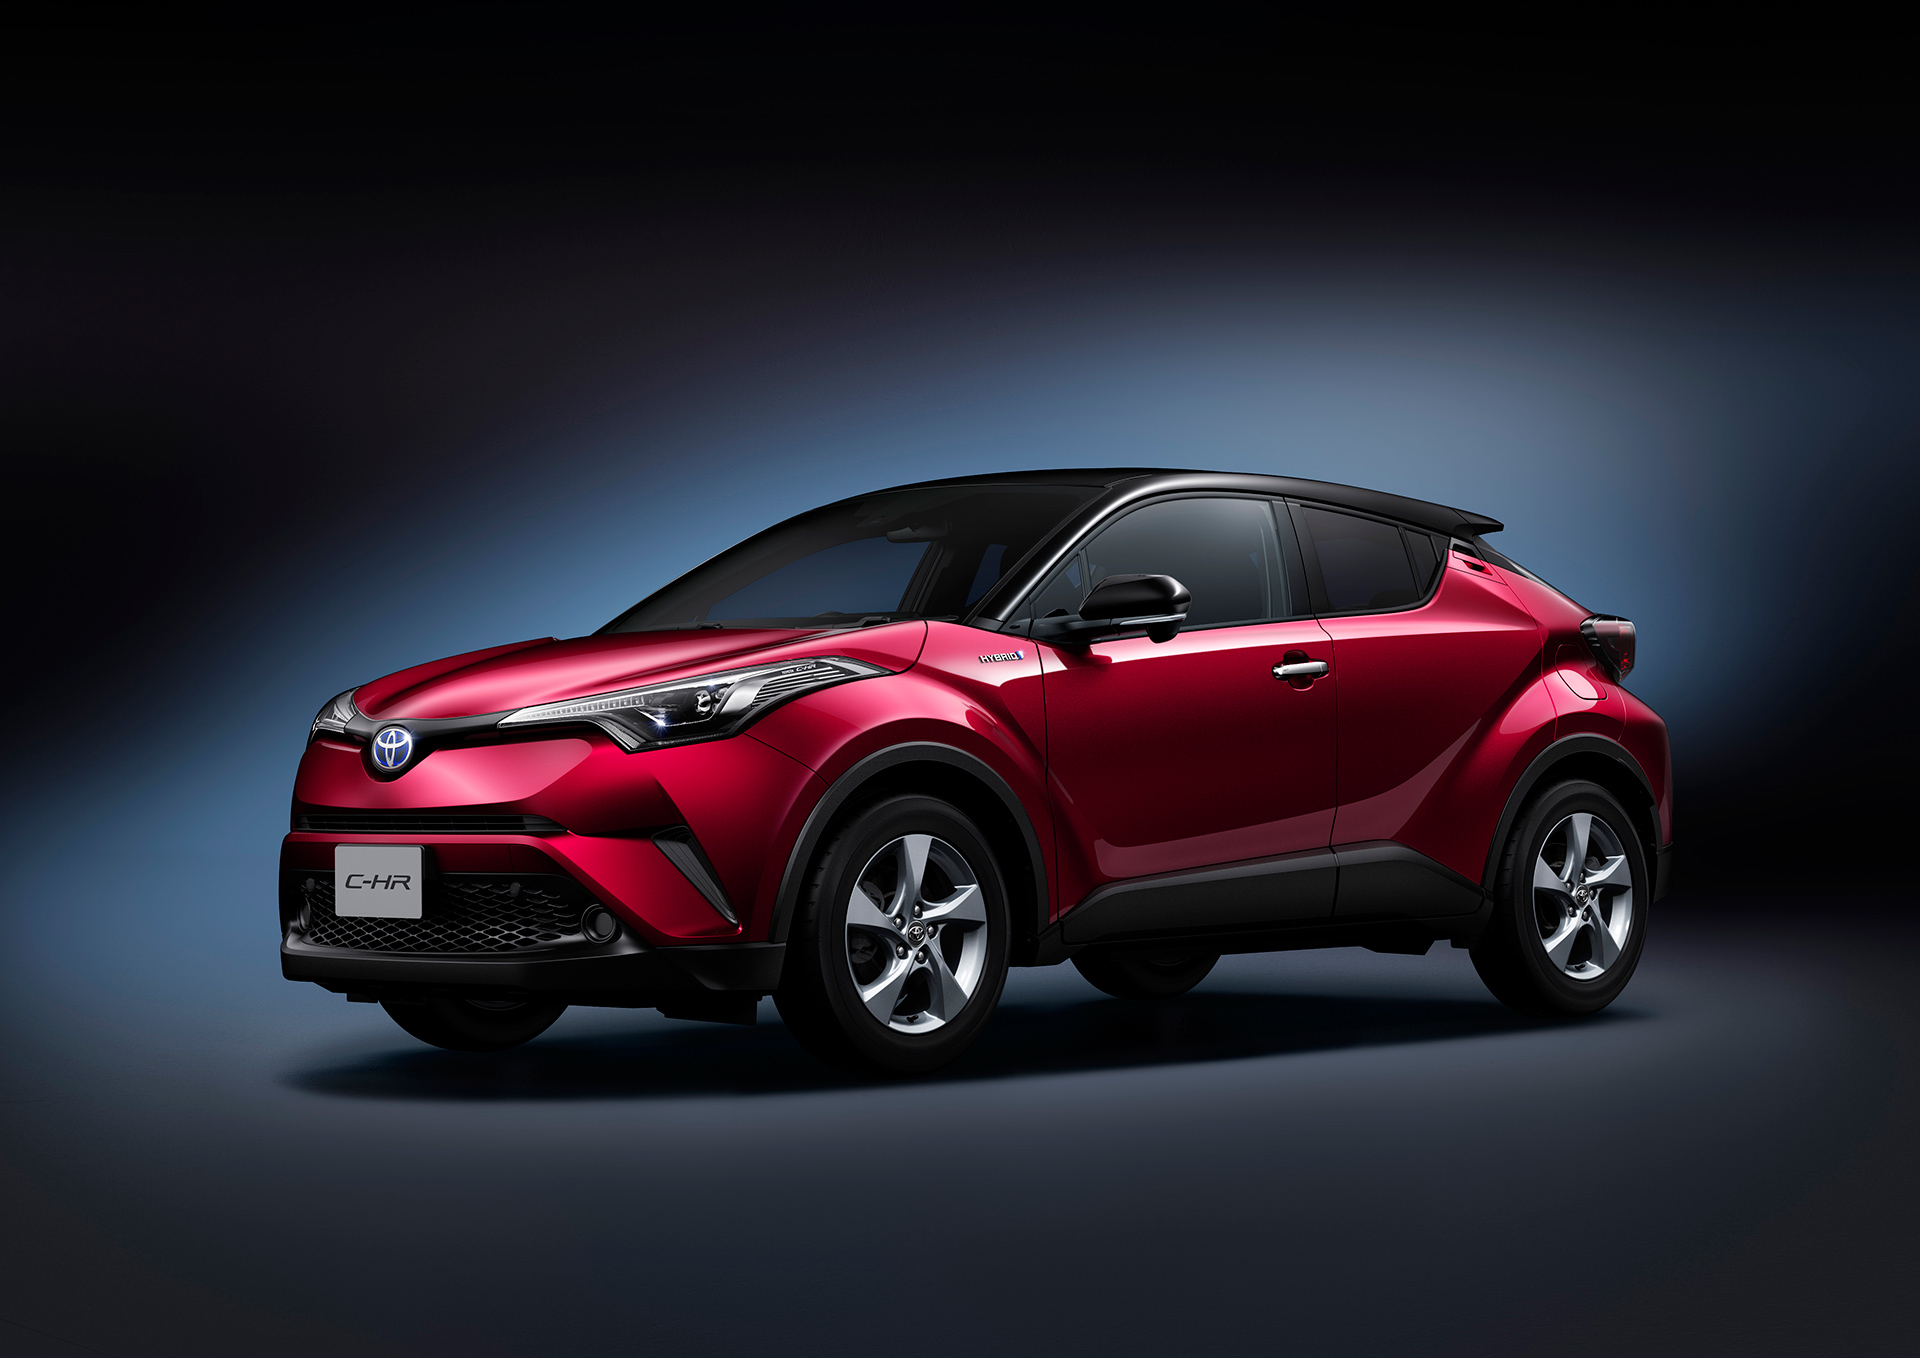 Toyota C-HR leads the pack as the top-selling new SUV in 2017, Toyota, Global Newsroom